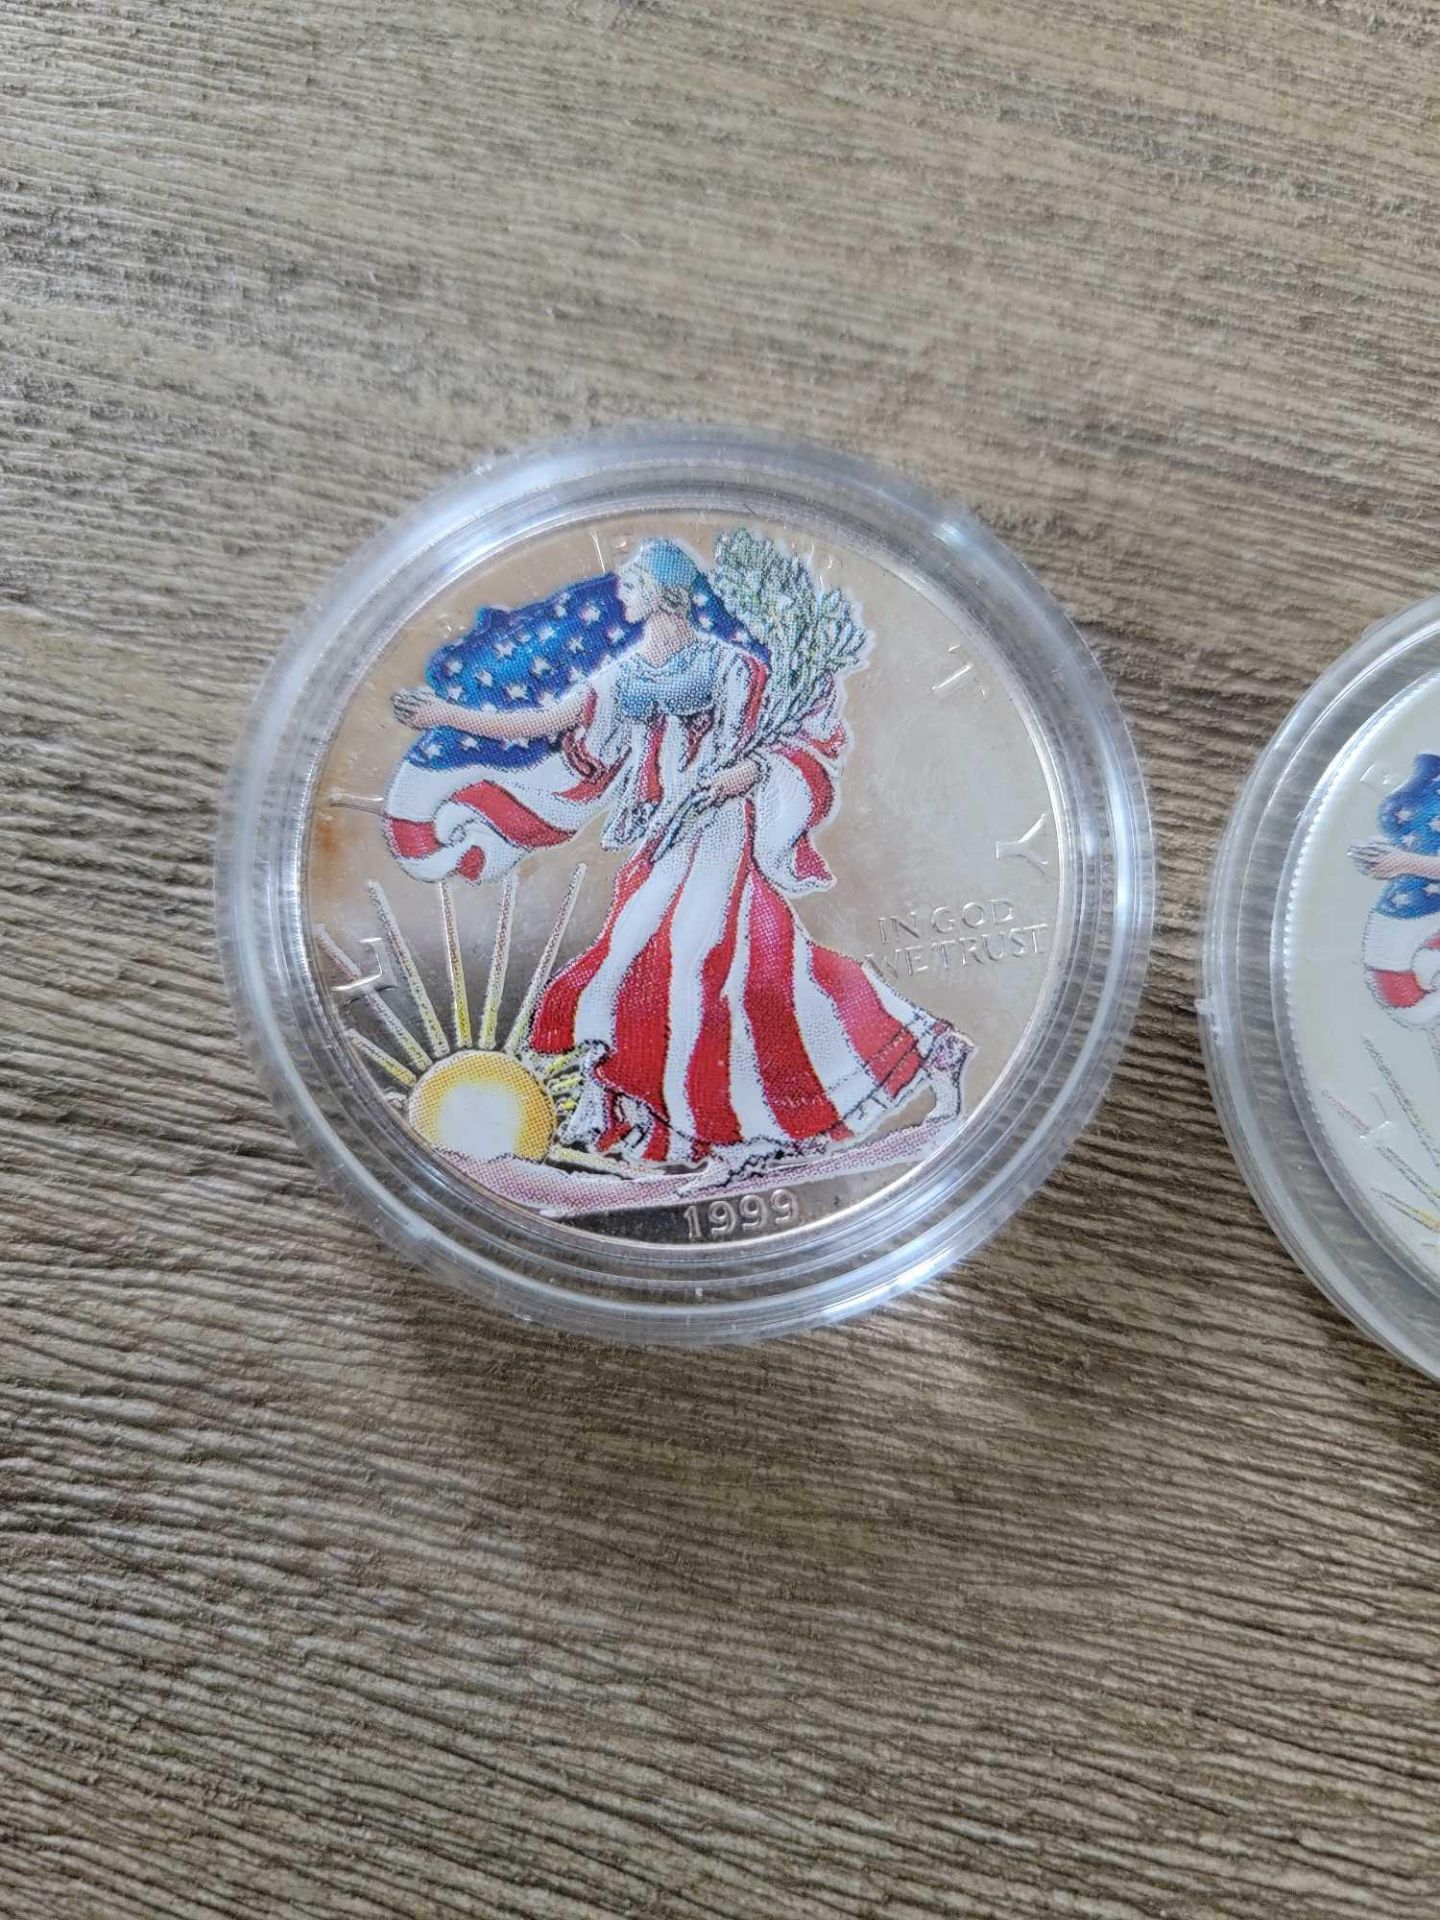 2 1999 Silver Eagle Colored Coins - Image 3 of 8